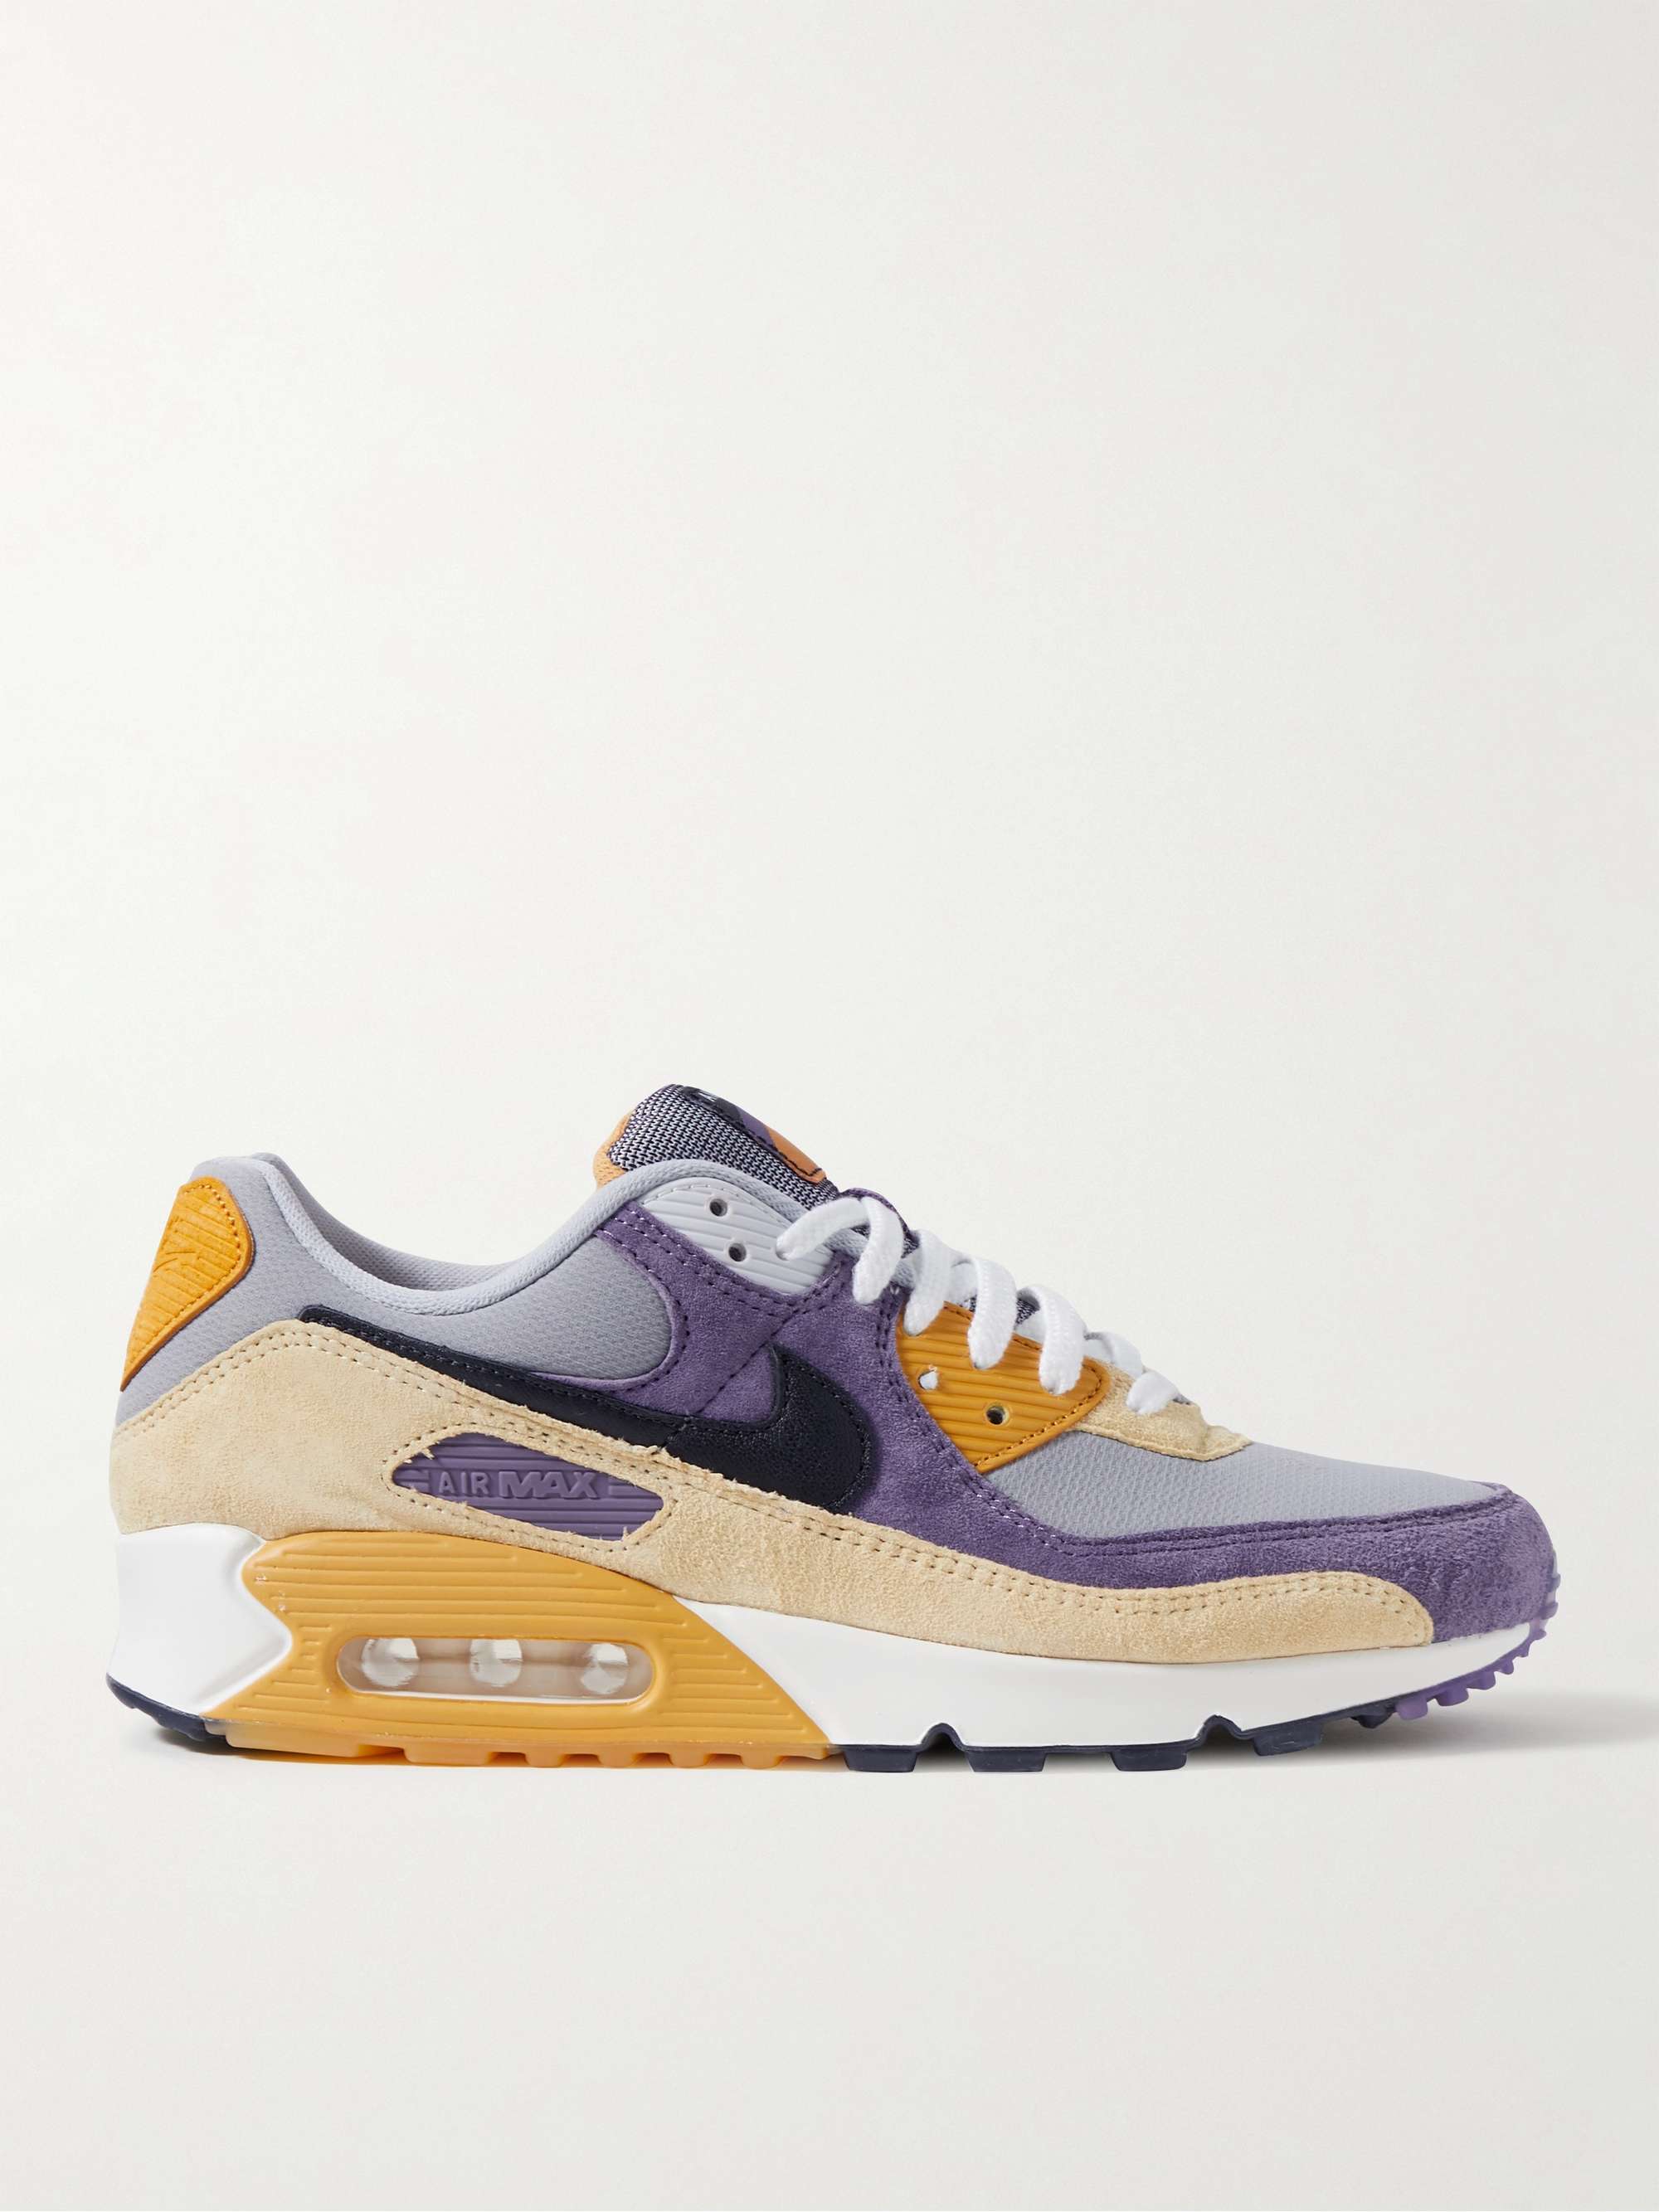 Conqueror Monarchy Fascinating Cream Air Max 90 NRG Suede and Leather-Trimmed Mesh Sneakers | NIKE | MR  PORTER